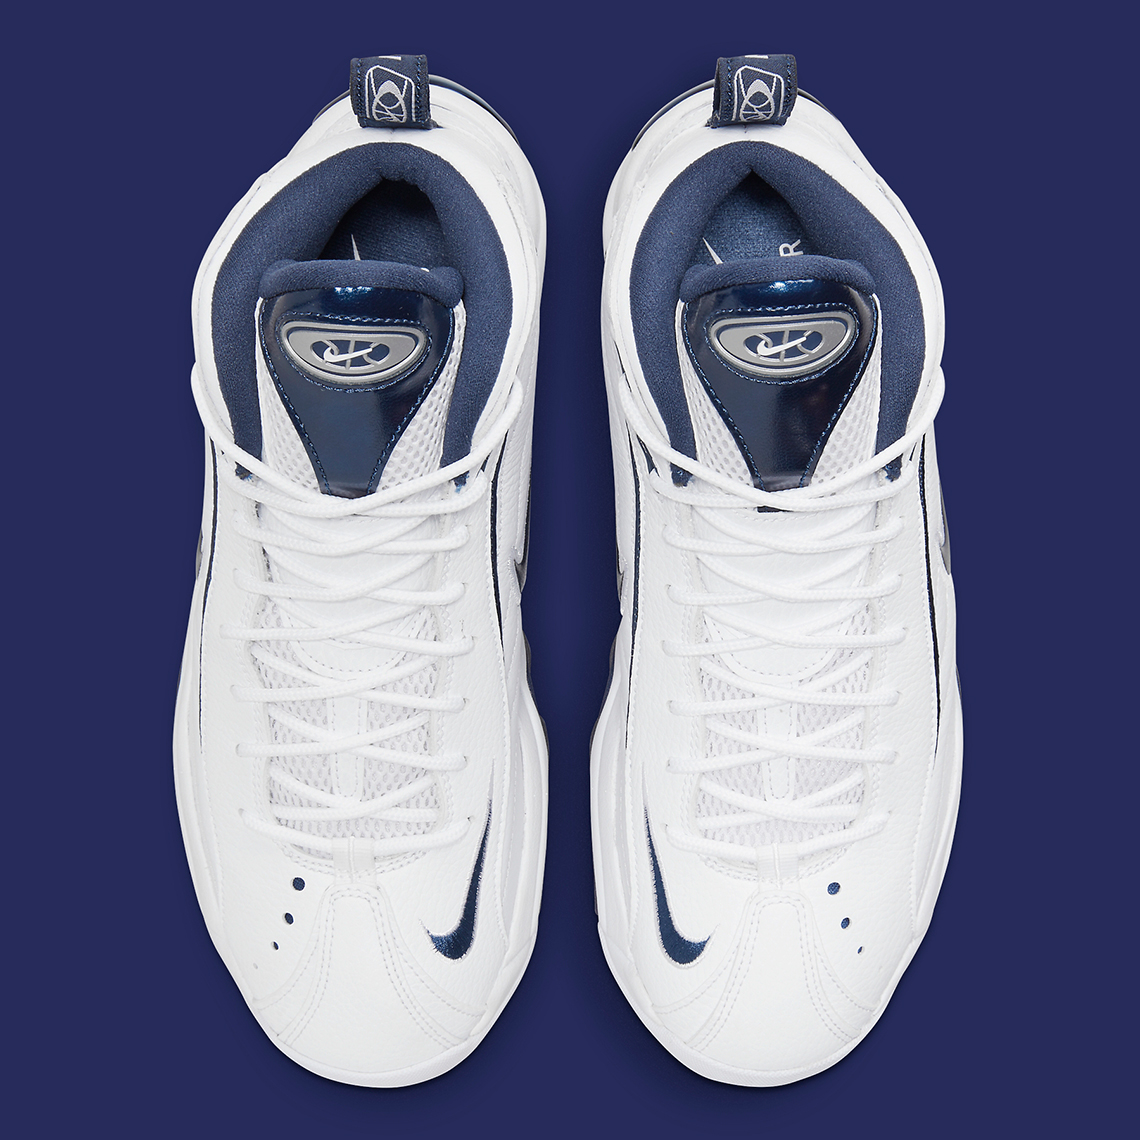 Nike Air Total Max Uptempo White Navy Cz2198 100 4